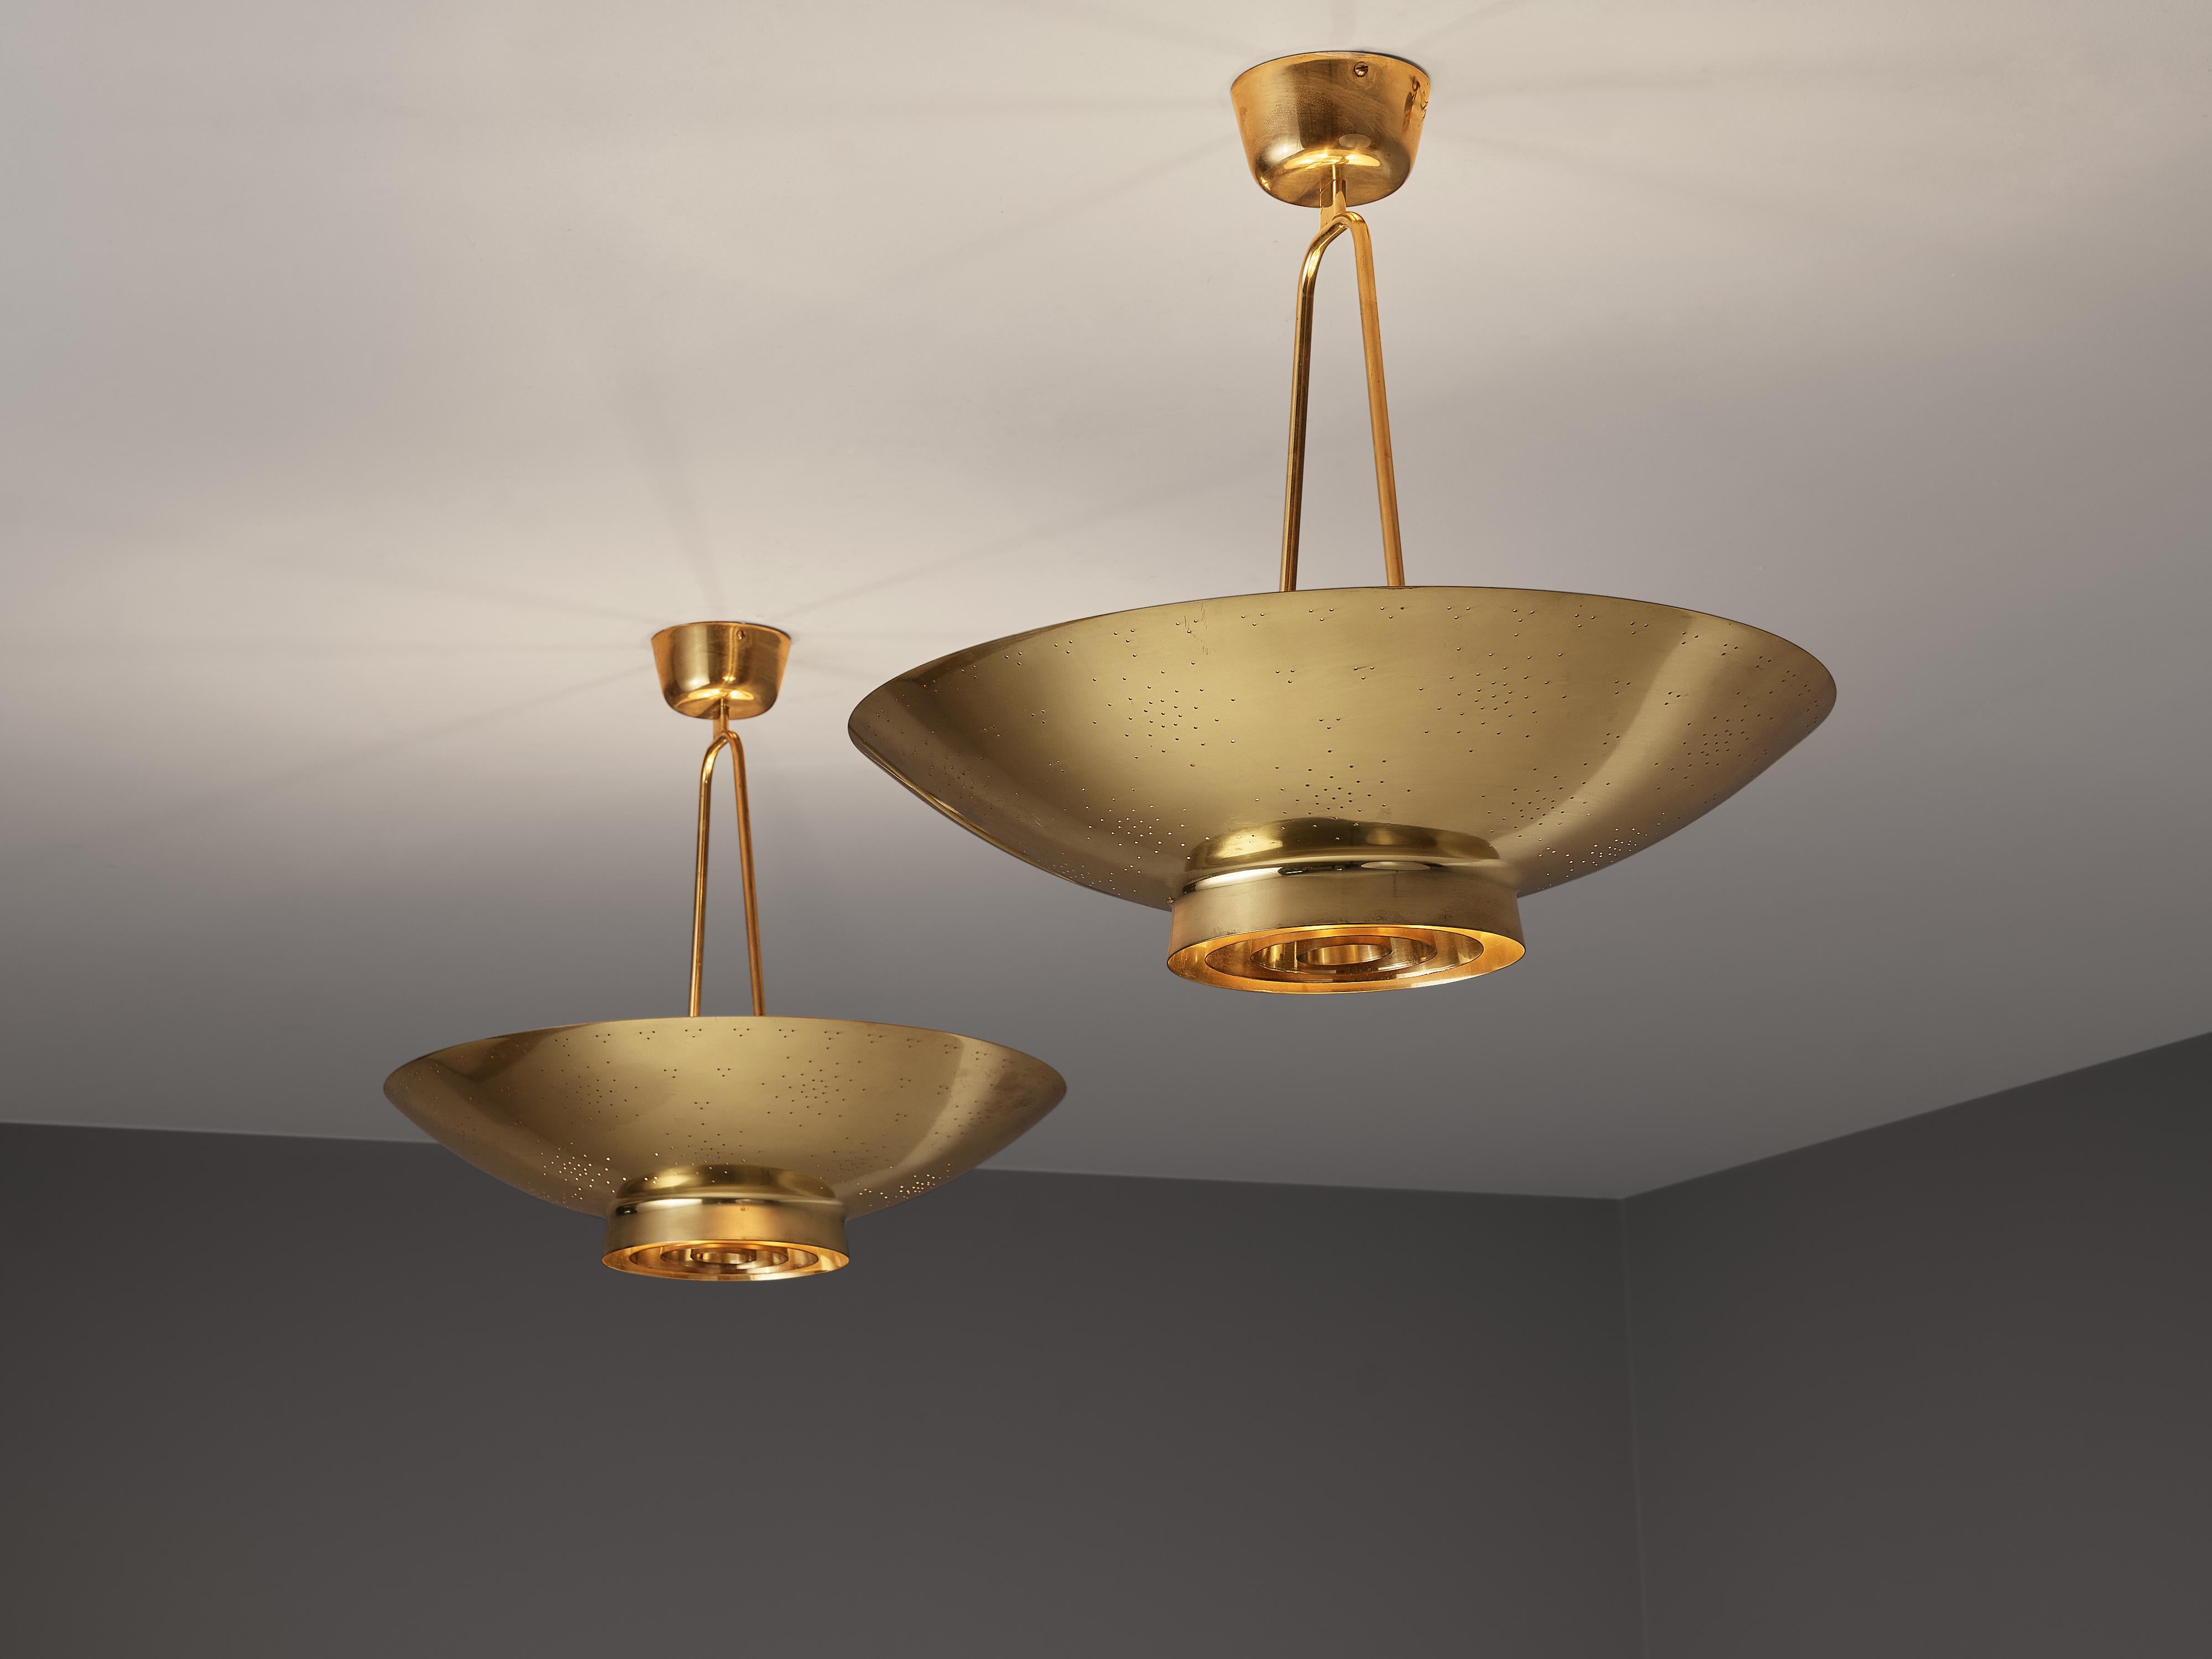 Paavo Tynell, pendant lights model ‘9060’, brass, Finland, 1950/52

Finnish designer Paavo Tynell designed the lamp 9060 for the office of a general at the United Nations building in NYC. Typical for Tynell’s iconic light designs is the way a